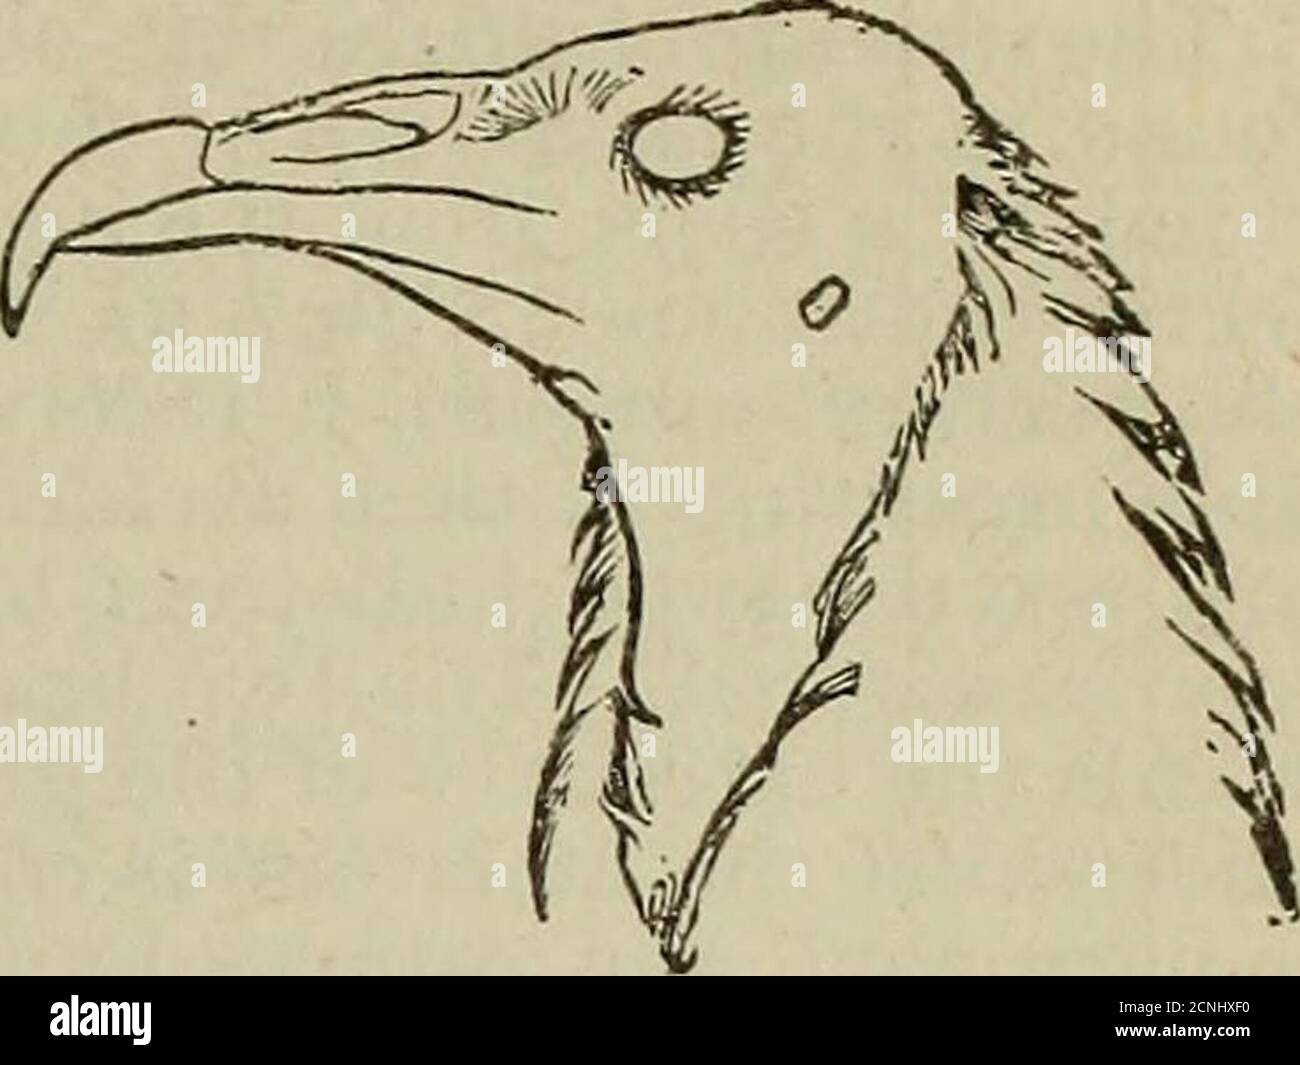 . Contributions to the anatomy of birds . «©3 .-a-© A © ^ S- J* ©• I—I — &gt;-&lt;,© 0W© * PrtH •«T3 ° a *a e cS p - B© 03 £, rtJ1^ ,M «S ,Brp ptSr*© 3,2 © O © ™ B 02 -f] ro P ©03 o a a-B-P M e &lt;c e0-©e © ©e? bfi a a © o ,©73 90 fl.-a e« £ «m G *5 2 * © «©^ S p*3 ^1: ||3 -a©* ,11 !©!Ill © H a .B © i ia2 © - ^ Bn3 -Or* ^p - a © B--c ^.2 £ © © ©© rB cS.© ©OB H O -a -a OS© * S © La O 00 u ©© eS IB © 00 a 03: ssj© © © Be5© [^O fe © «© jp ^©^ ©„ rp a Mg 2 a,© o §1 QQ S- -a ©©^ f- p © u •- .a p © p O © © P*» «+J^:©© fc^.a 5 . m p a p rp.r-,eS ^ .a rl Sa O © .2 ©© a 3rig 5Q ^ w w p-2,2 *rp^©^rp J2 Stock Photo